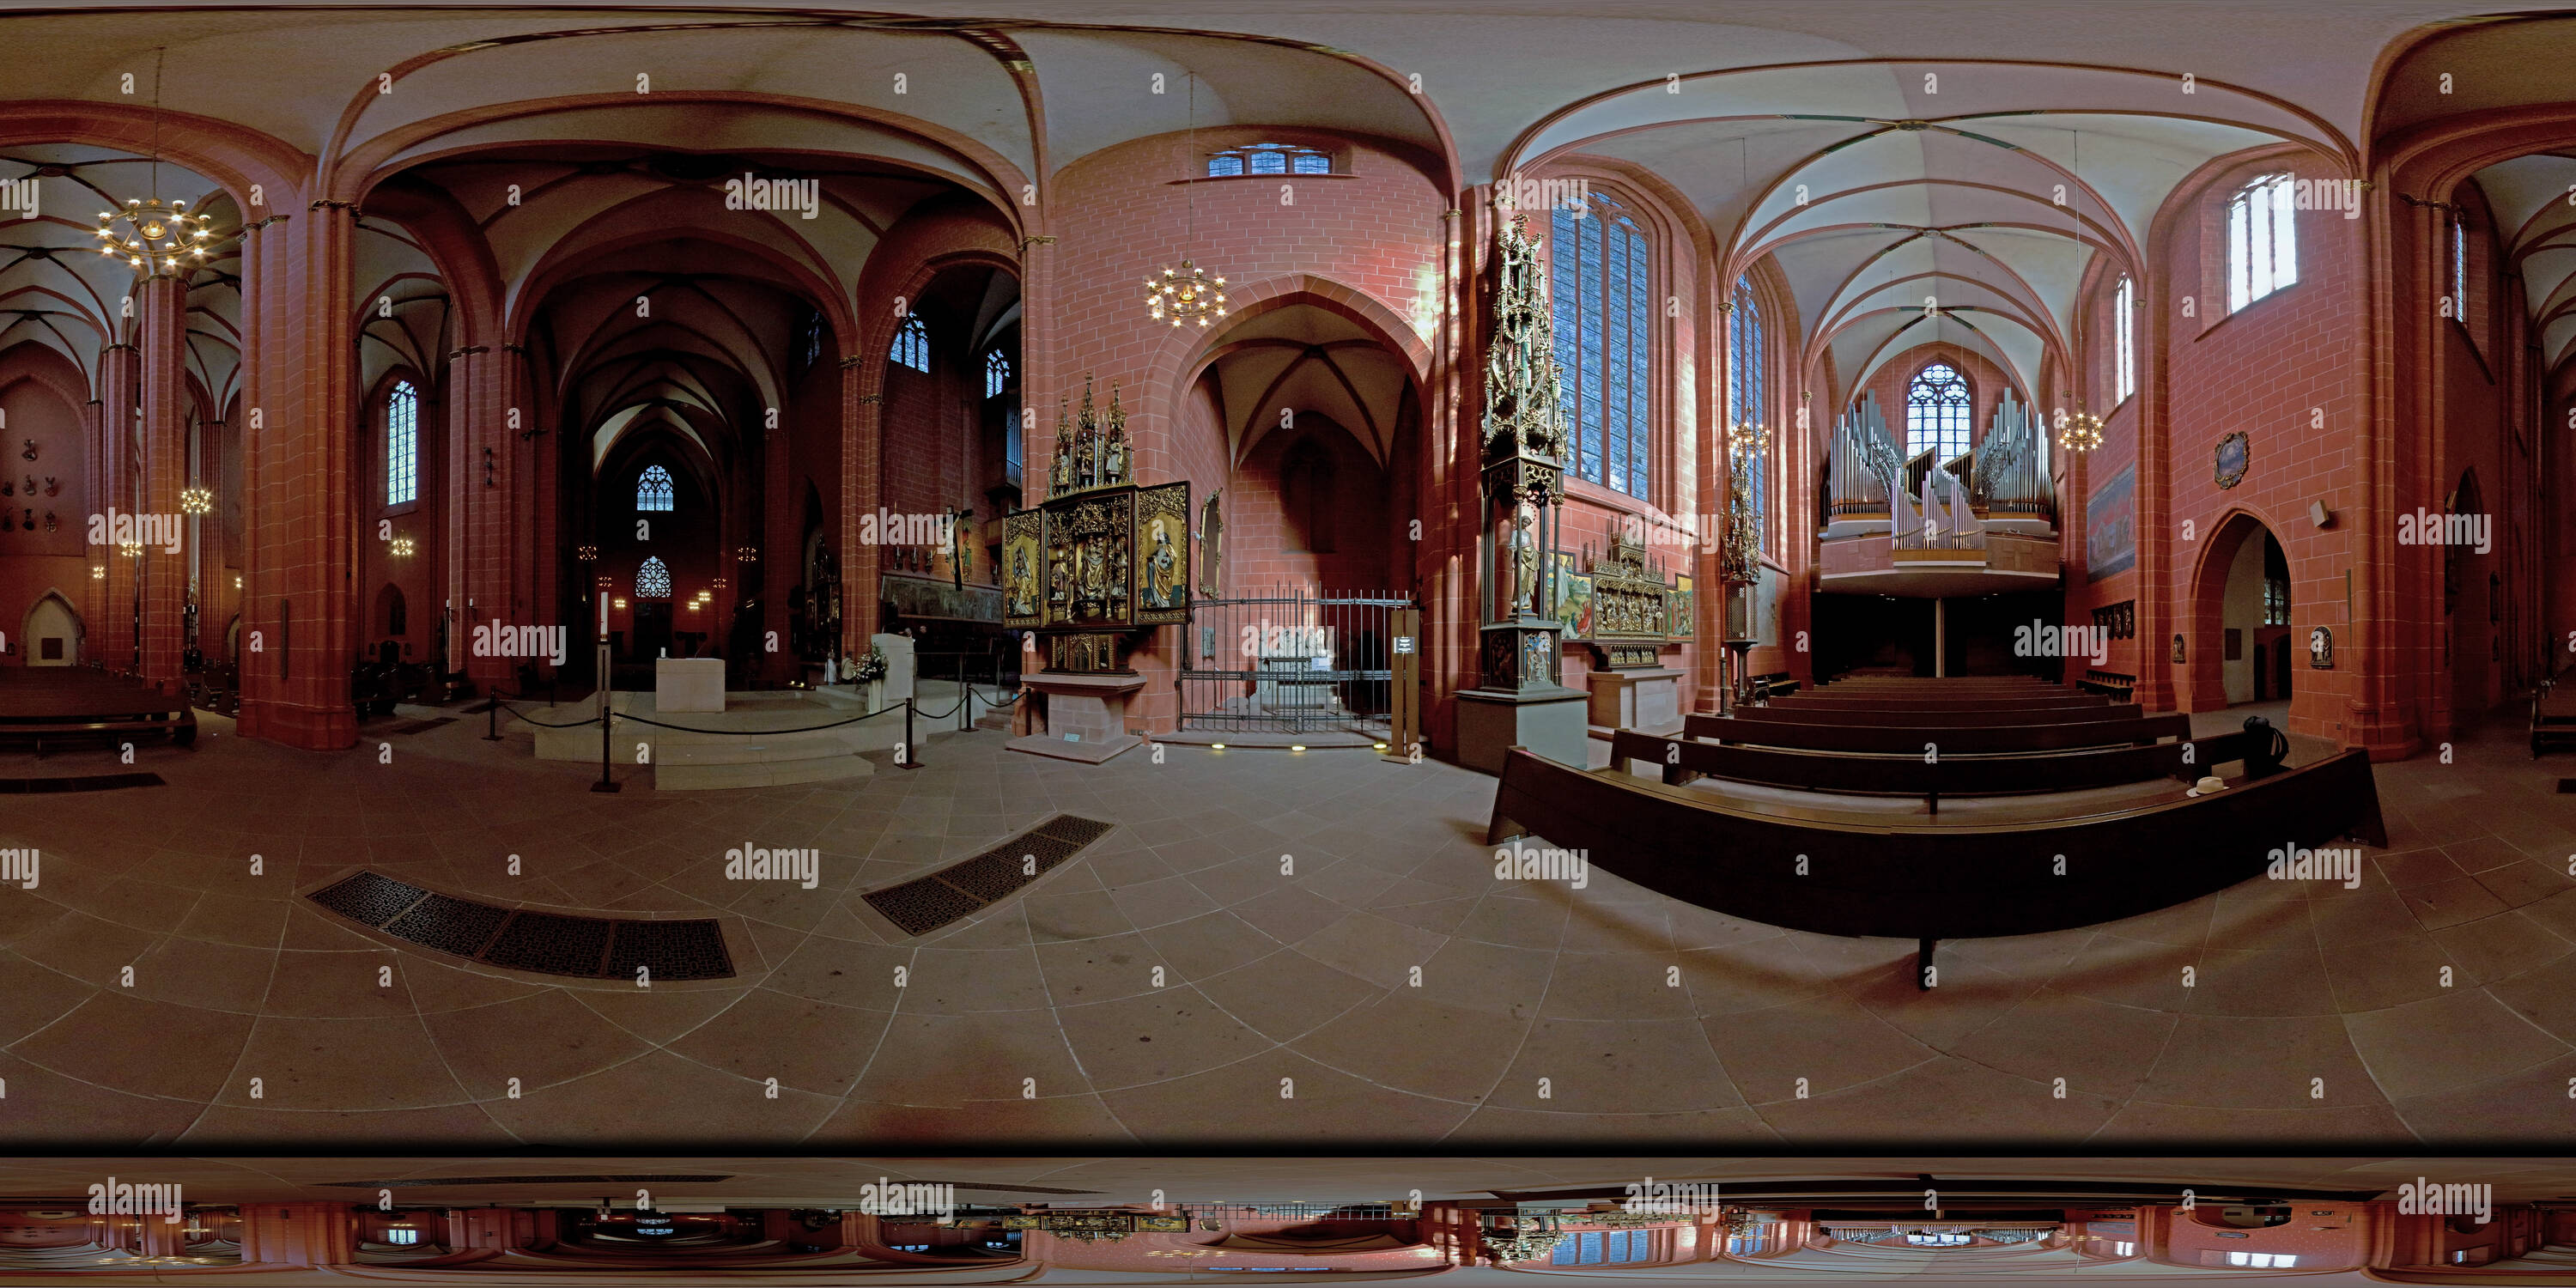 360 degree panoramic view of Imperial Cathedral of Saint Bartholomew Frankfurt, Crossing, 2016-04, freehand